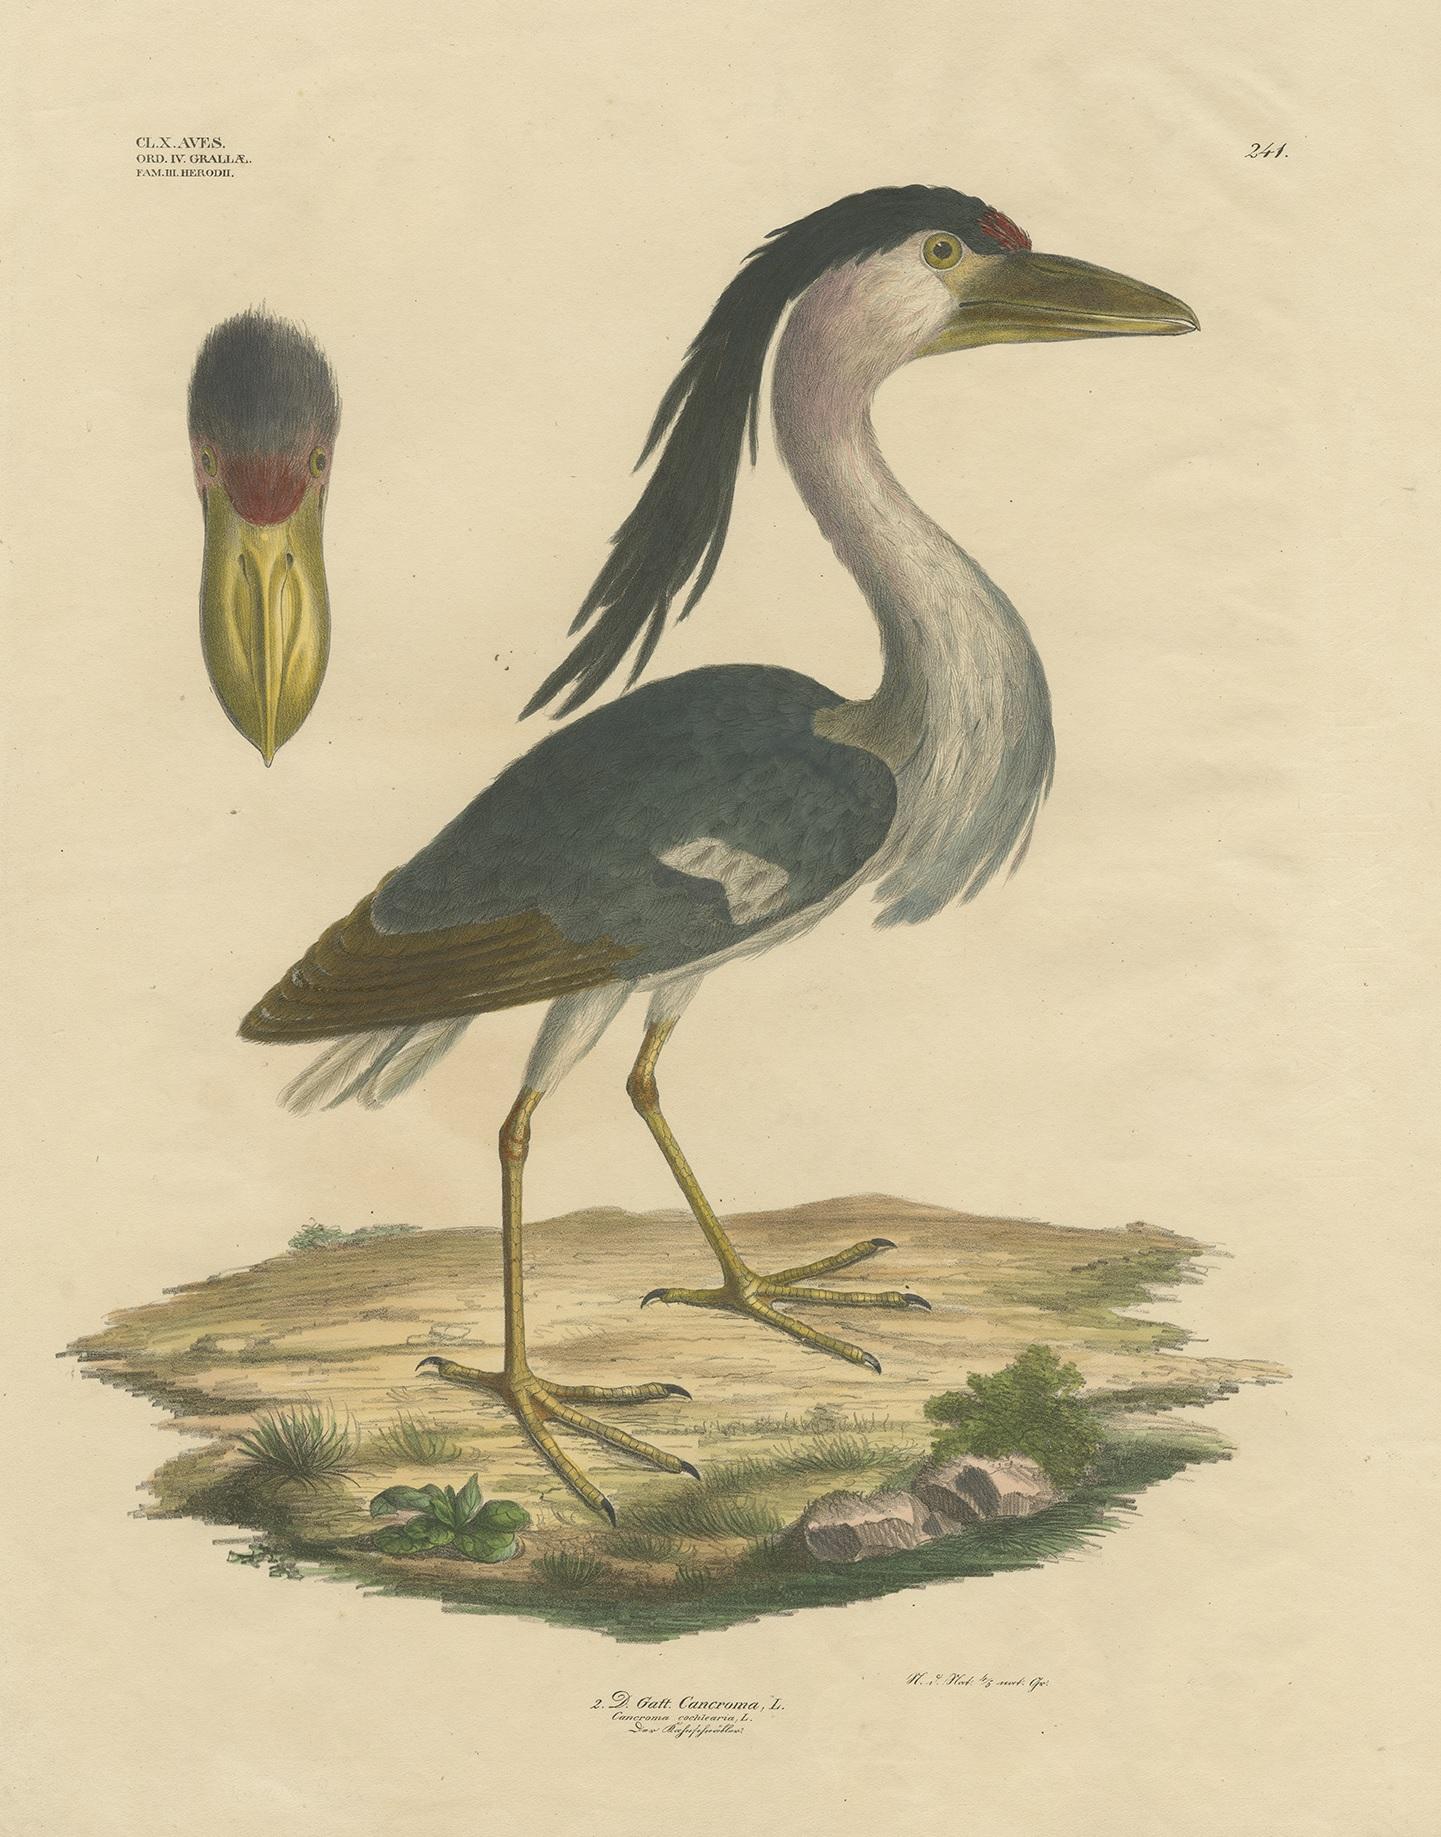 Antique bird print titled 'Gatt Cancroma'. Large lithograph of the boat-billed heron, an atypical member of the heron family, and was formerly placed in a monotypic family, the Cochlearidae. It lives in mangrove swamps from Mexico south to Peru and